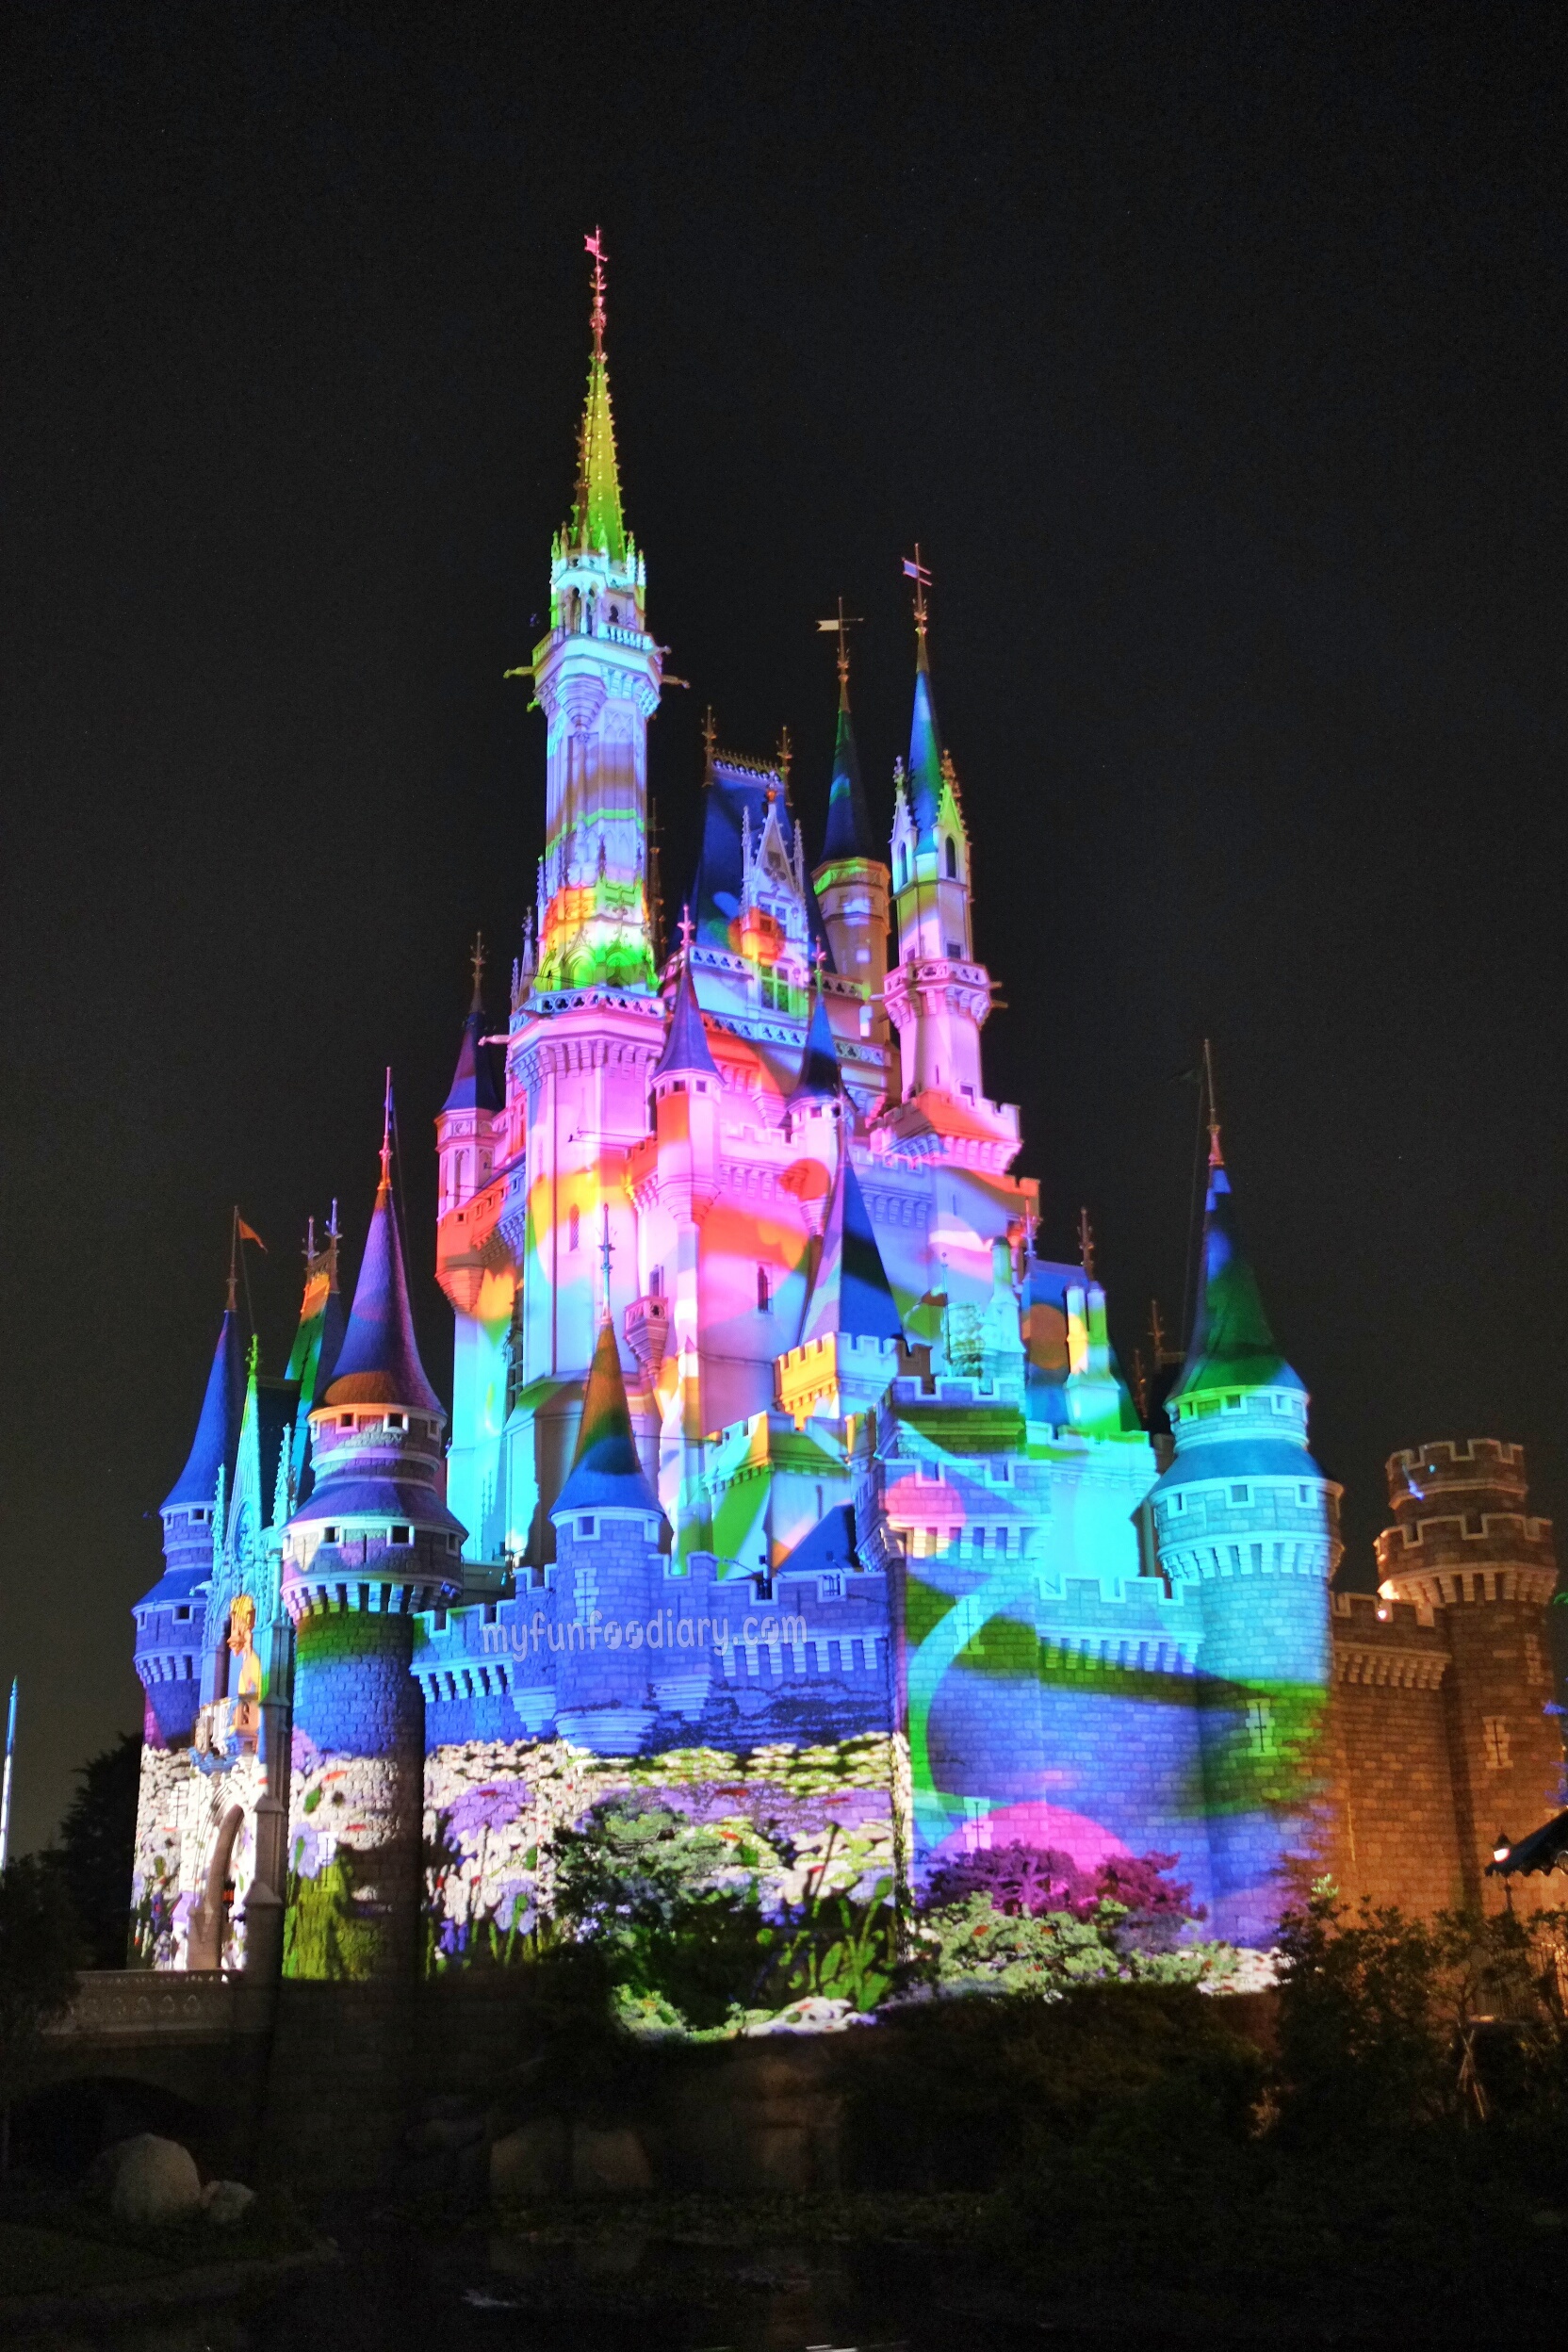 3D Mapping on Cinderella Castle at Tokyo Disneyland by Myfunfoodiary